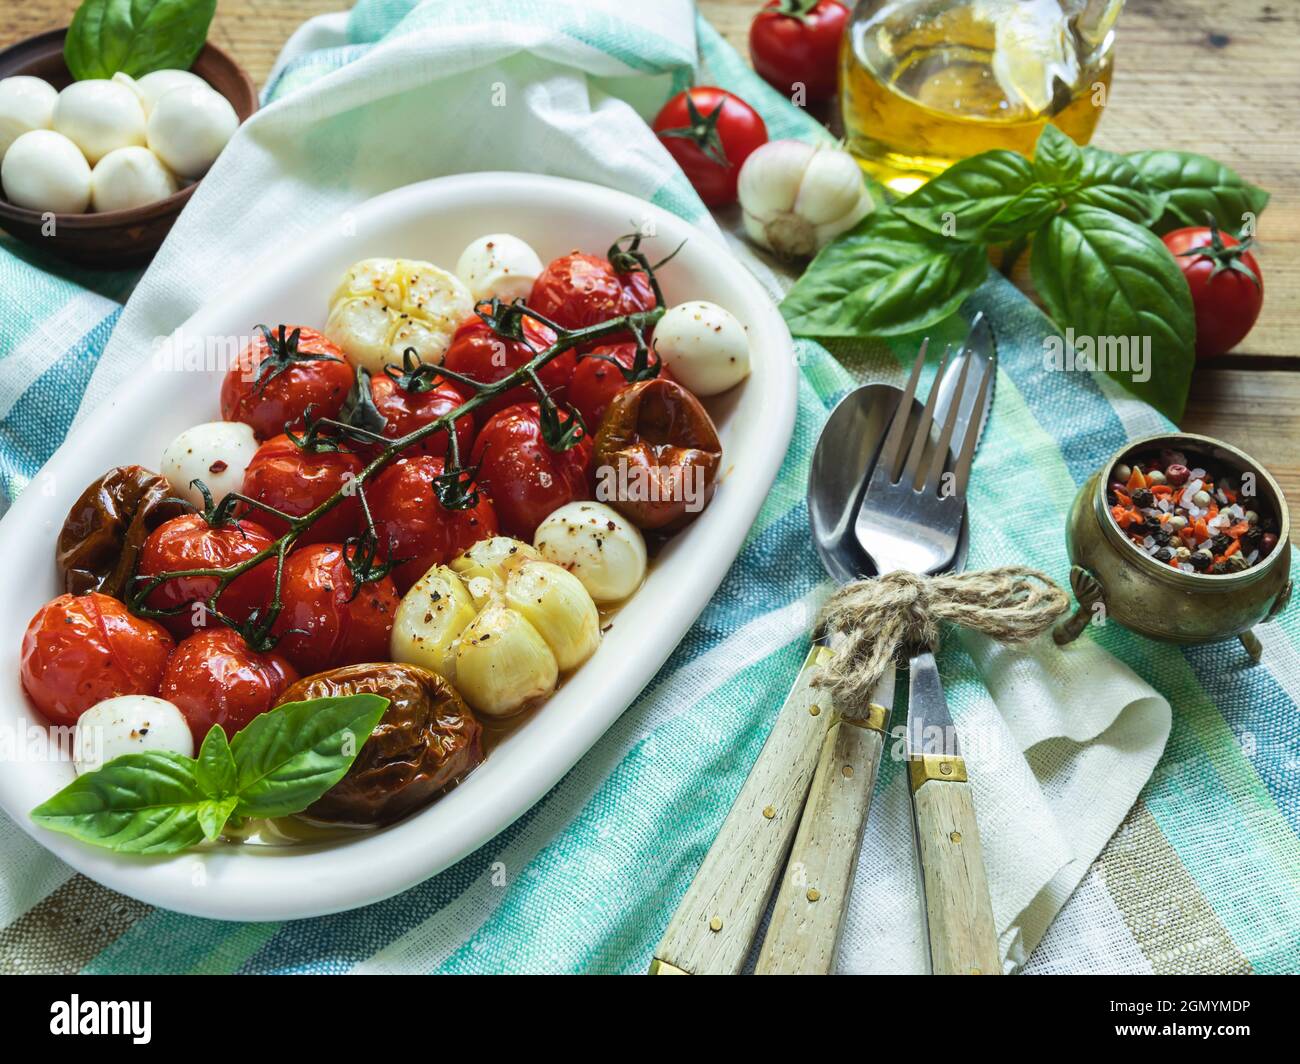 Salad. Baked tomato, basil, garlic with mozzarella cheese, ceramic dishes. cooking, cooked dish. Stock Photo